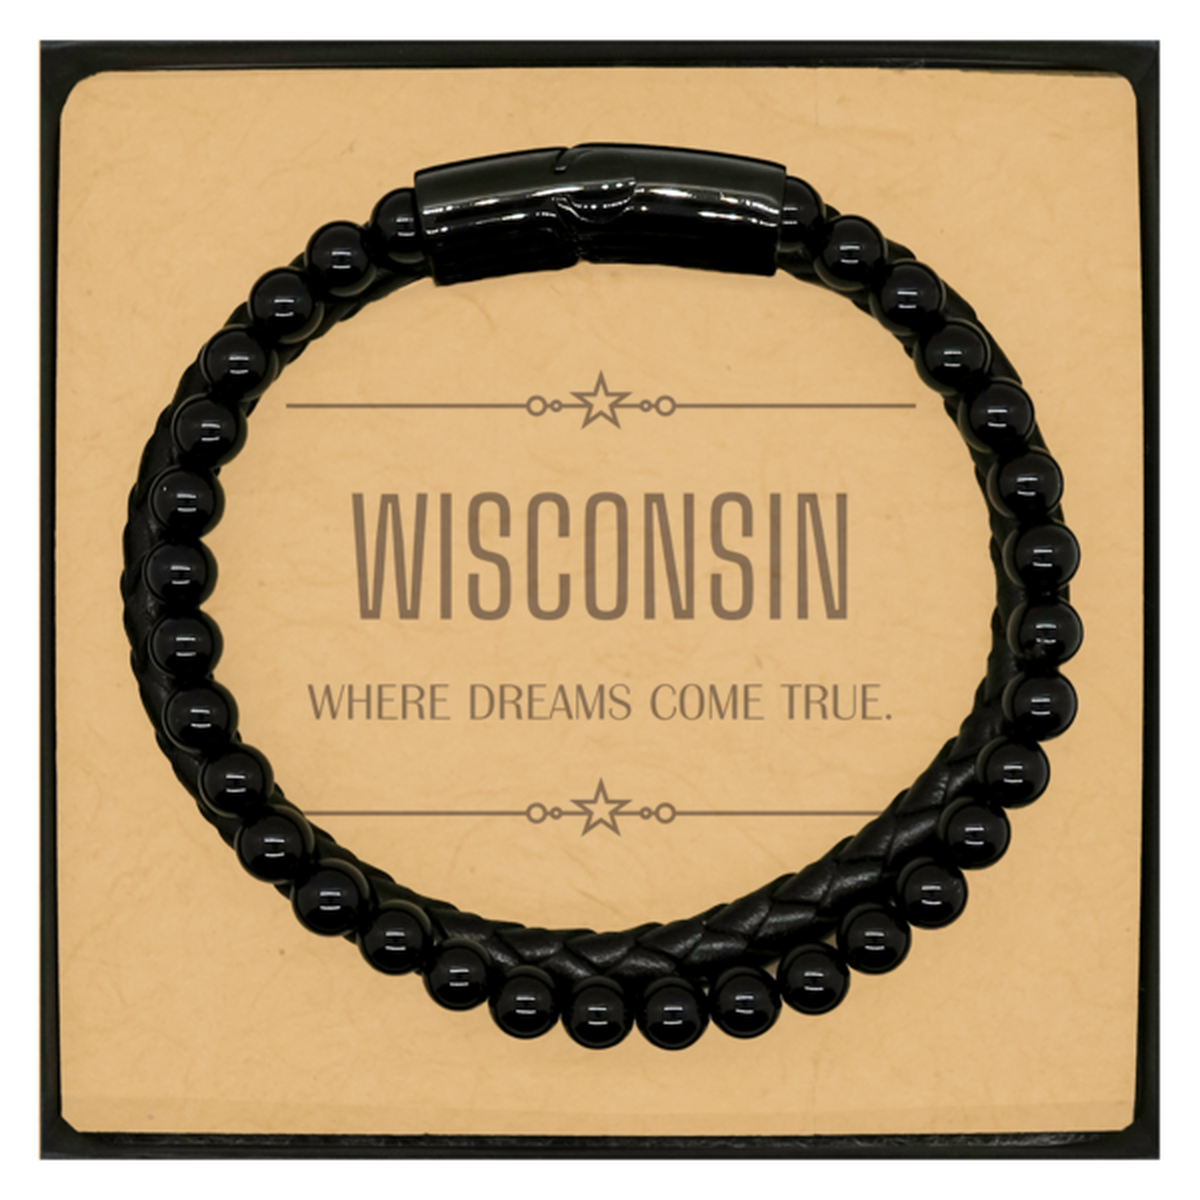 Love Wisconsin State Stone Leather Bracelets, Wisconsin Where dreams come true, Birthday Christmas Inspirational Gifts For Wisconsin Men, Women, Friends